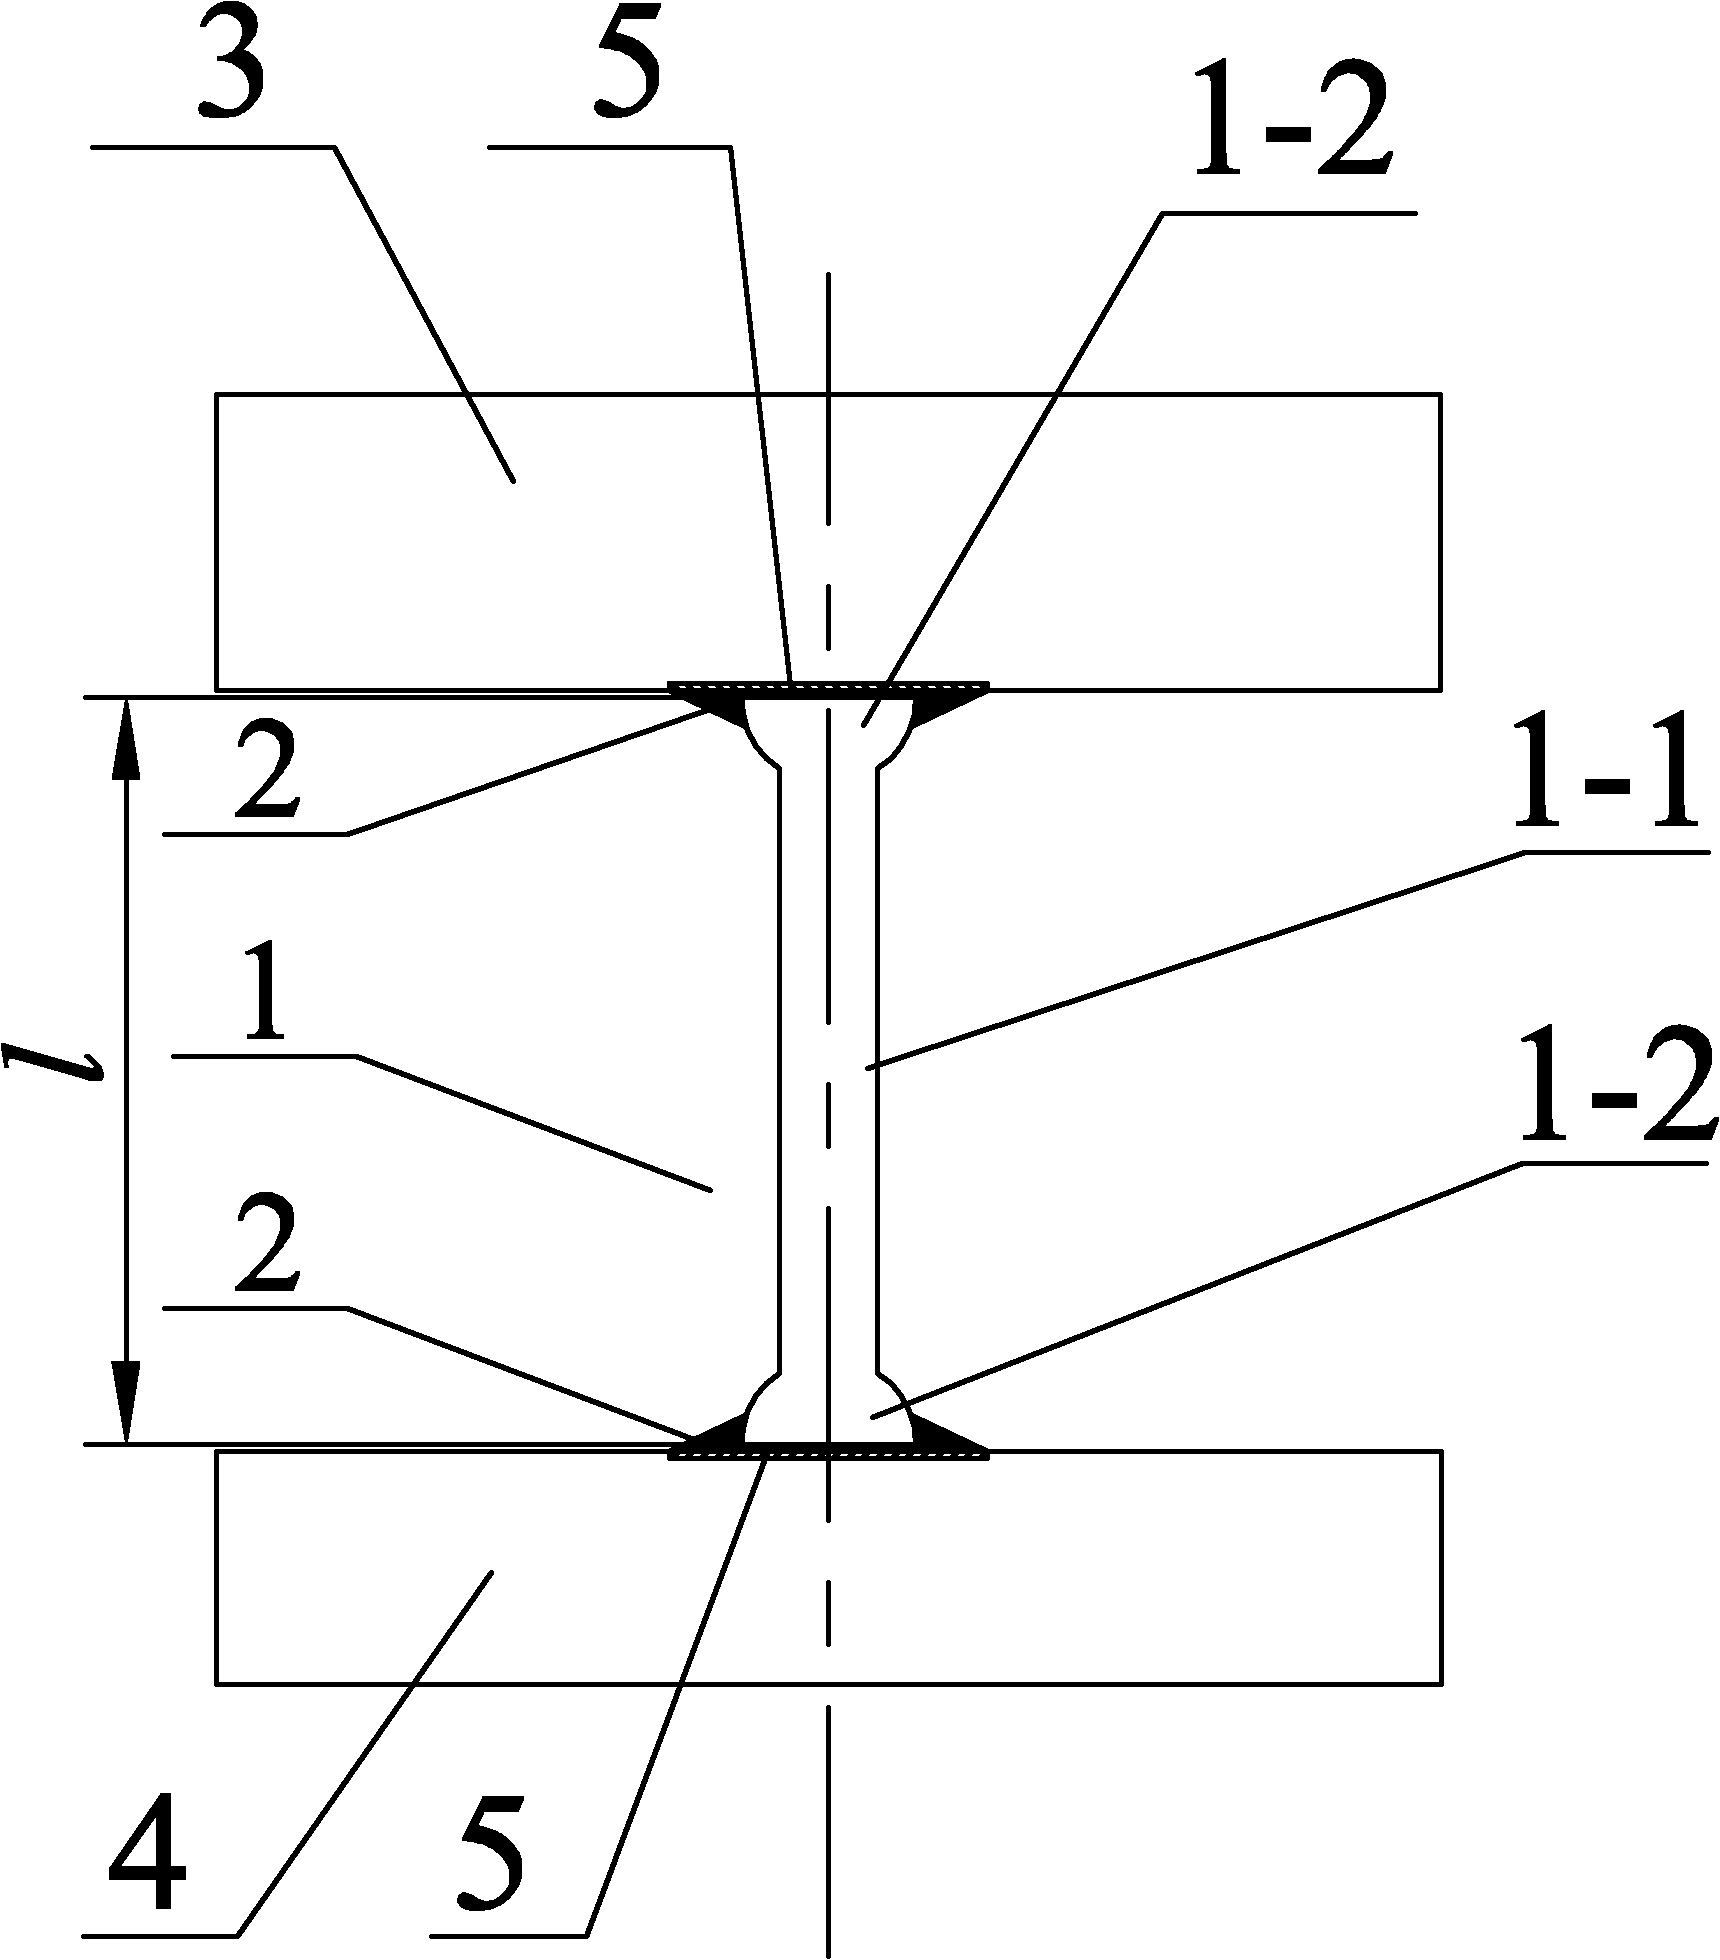 Interconnection structure for improving reliability of soldering spot of soft soldering of CCGA (Ceramic Column Grid Array) device and implementation method